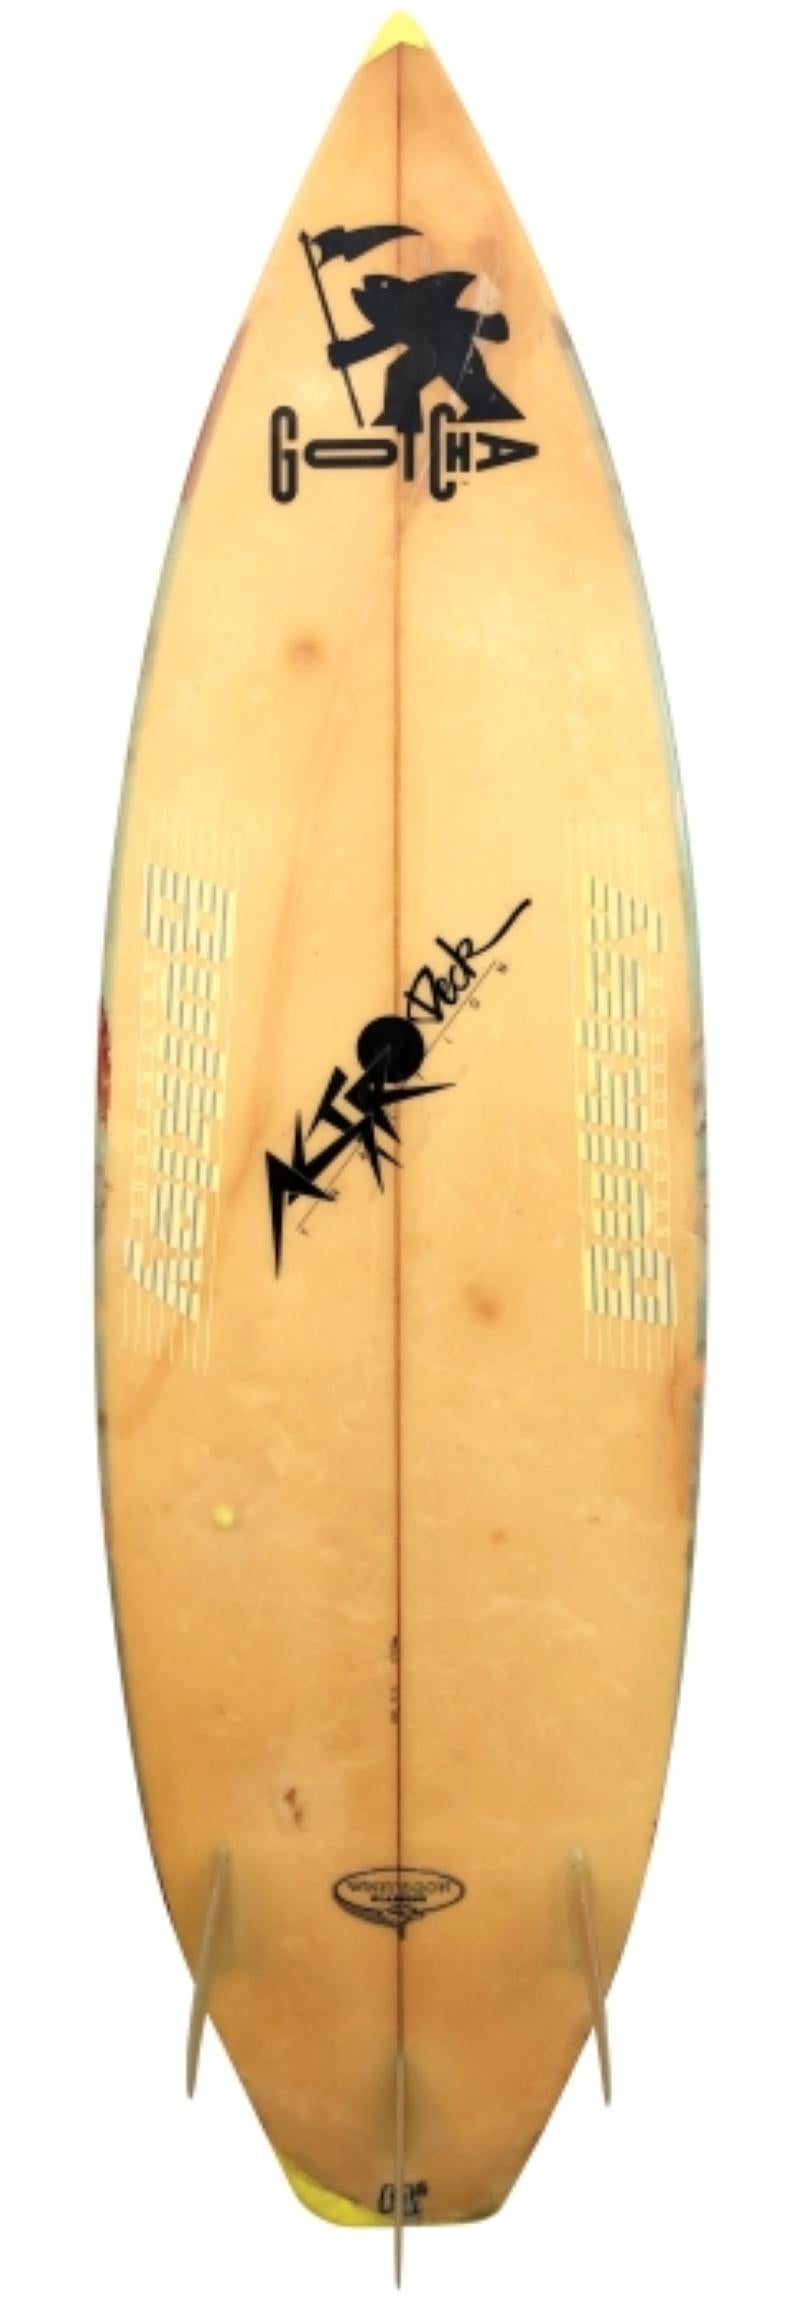 1986 Gotcha Team thruster surfboard shaped by Brian Bulkley. Features an airbrush design indicative of the 1980s. Glassed-on thruster (tri-fin) setup with Gotcha Team and Astro Deck Team rider under-fiberglass lams. A great example of a sponsored